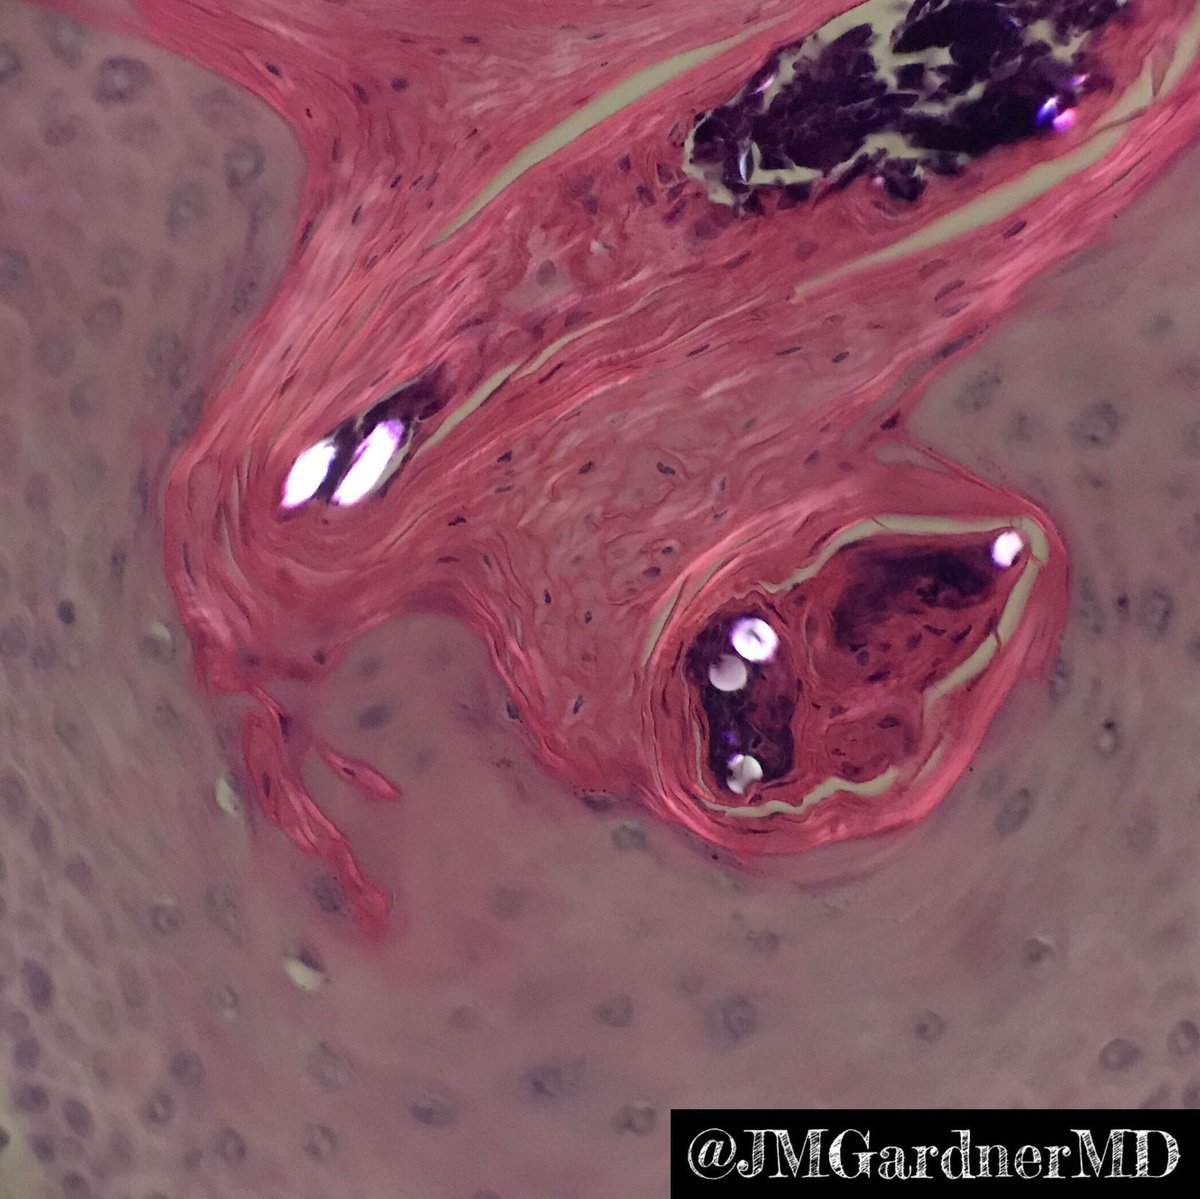 Skin papule. What is happening here? What is the name of the phenomenon? Pic 3 is polarized...what are the white glowing structures? Answer & explanation: kikoxp.com/posts/9996 #pathology #pathologists #pathTwitter #dermpath #dermatology #dermatologia #dermtwitter